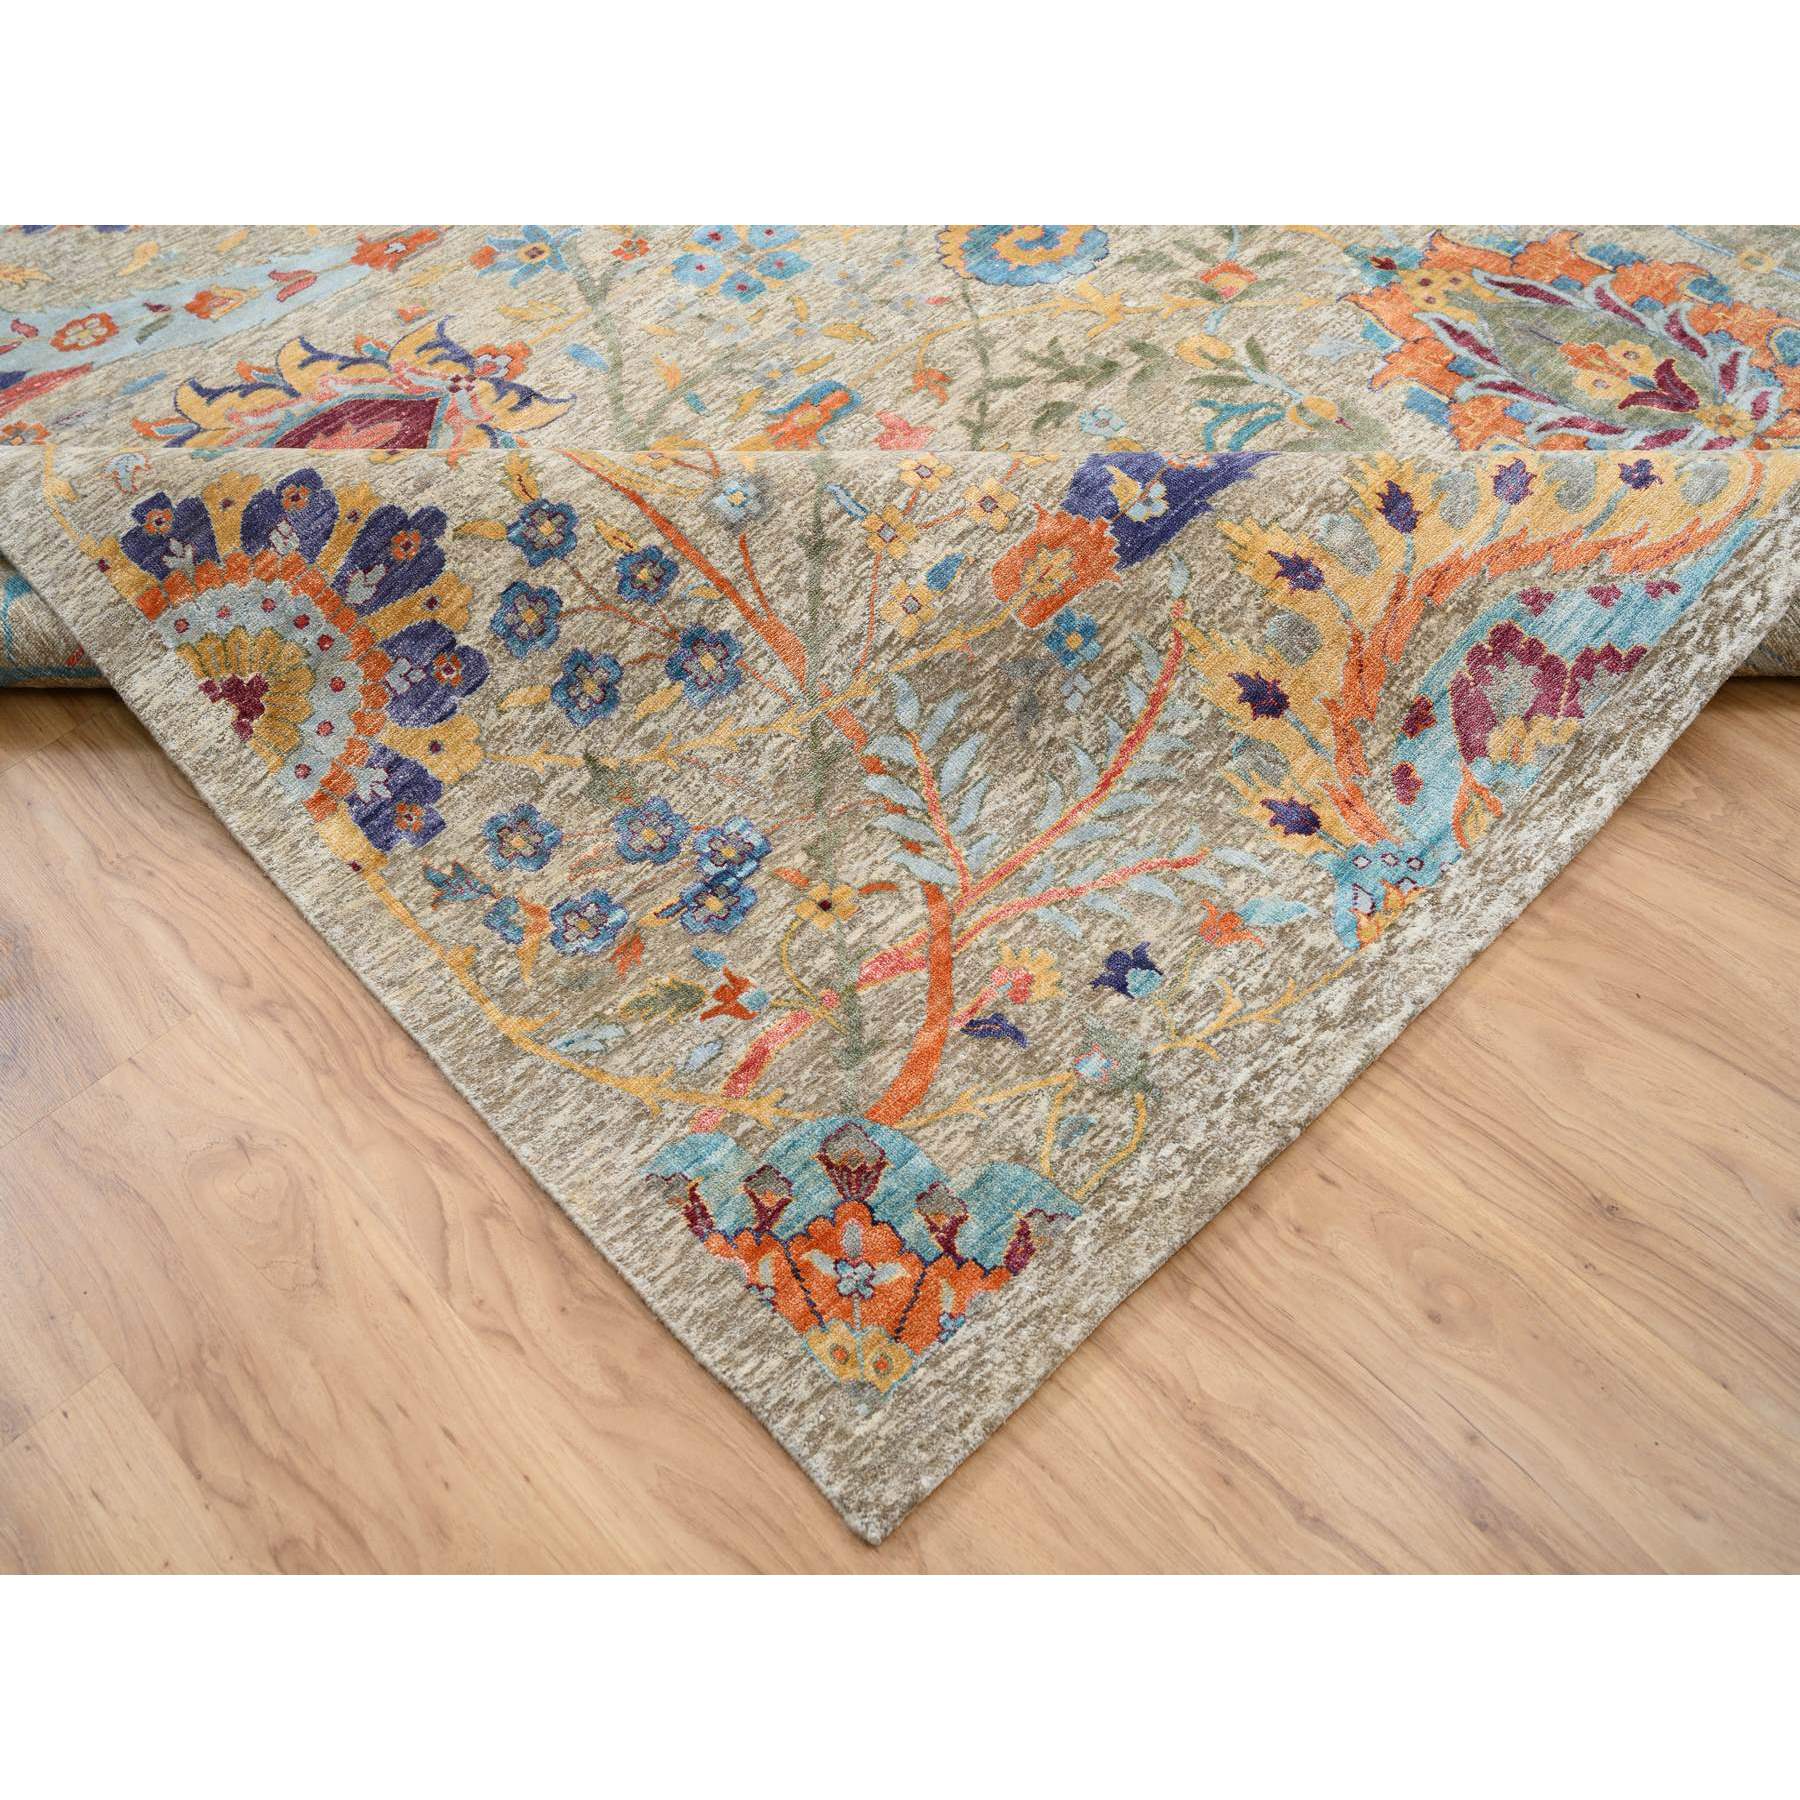 11'10"x18' Taupe, Sickle Leaf Design, Silk With Textured Wool, Hand Woven, Oriental, Oversized Rug 